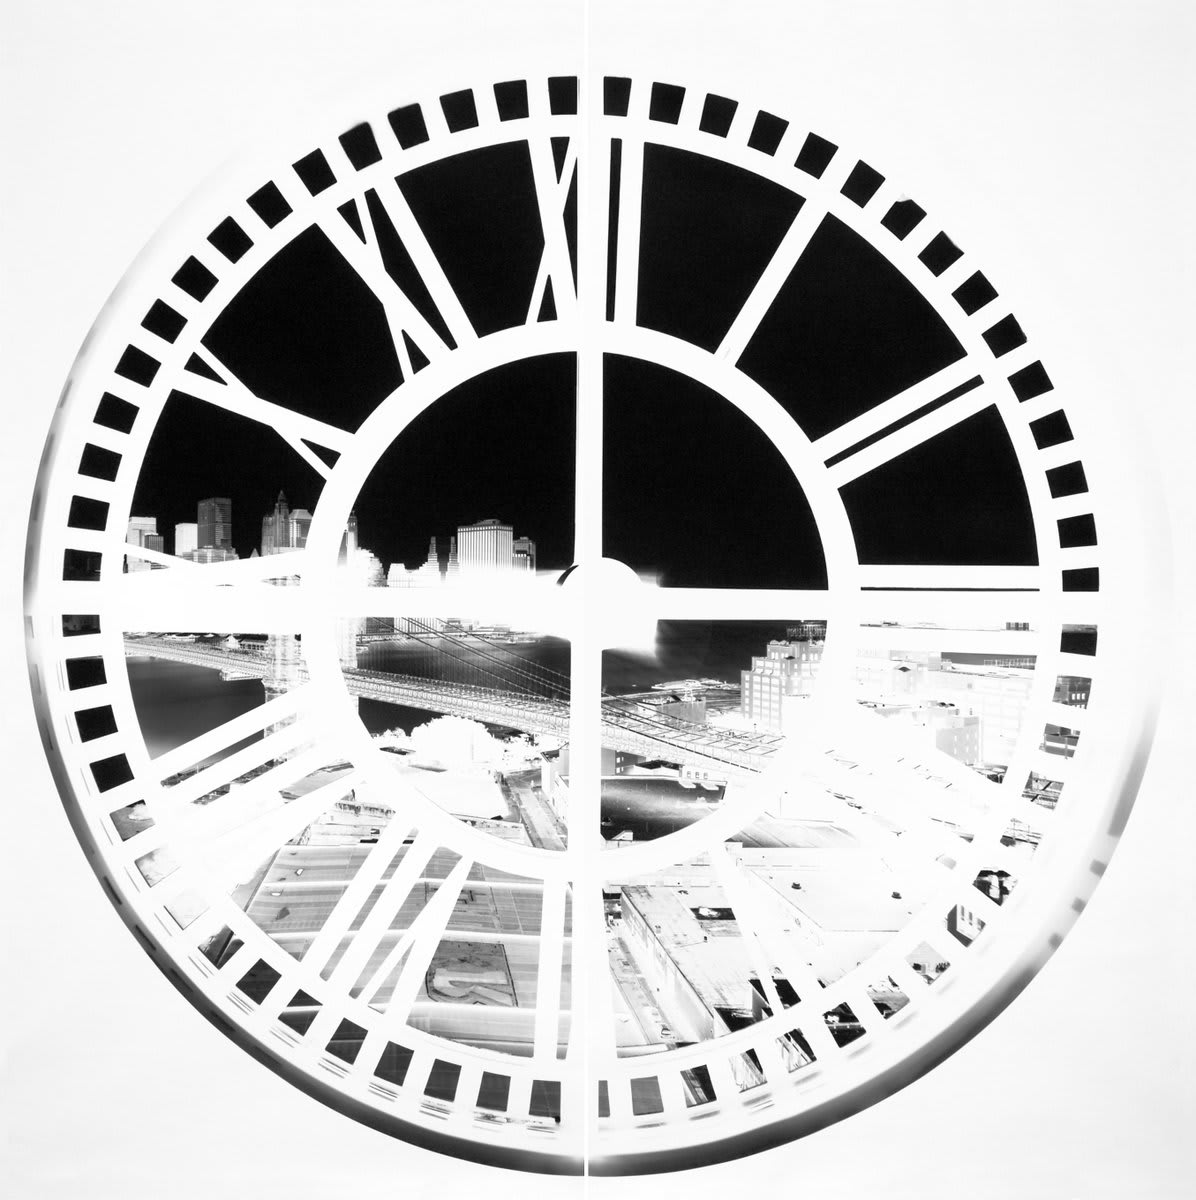 Photographs Take Time recently opened at the @ChryslerMuseum in Norfolk, Virginia, showing works by many artists from the museum's holdings. https://t.co/2ZFq0AKRHY Vera Lutter, Clock Tower, Brooklyn, XLIV: June 22-23, 2009. Courtesy The Chrysler Museum of Art.